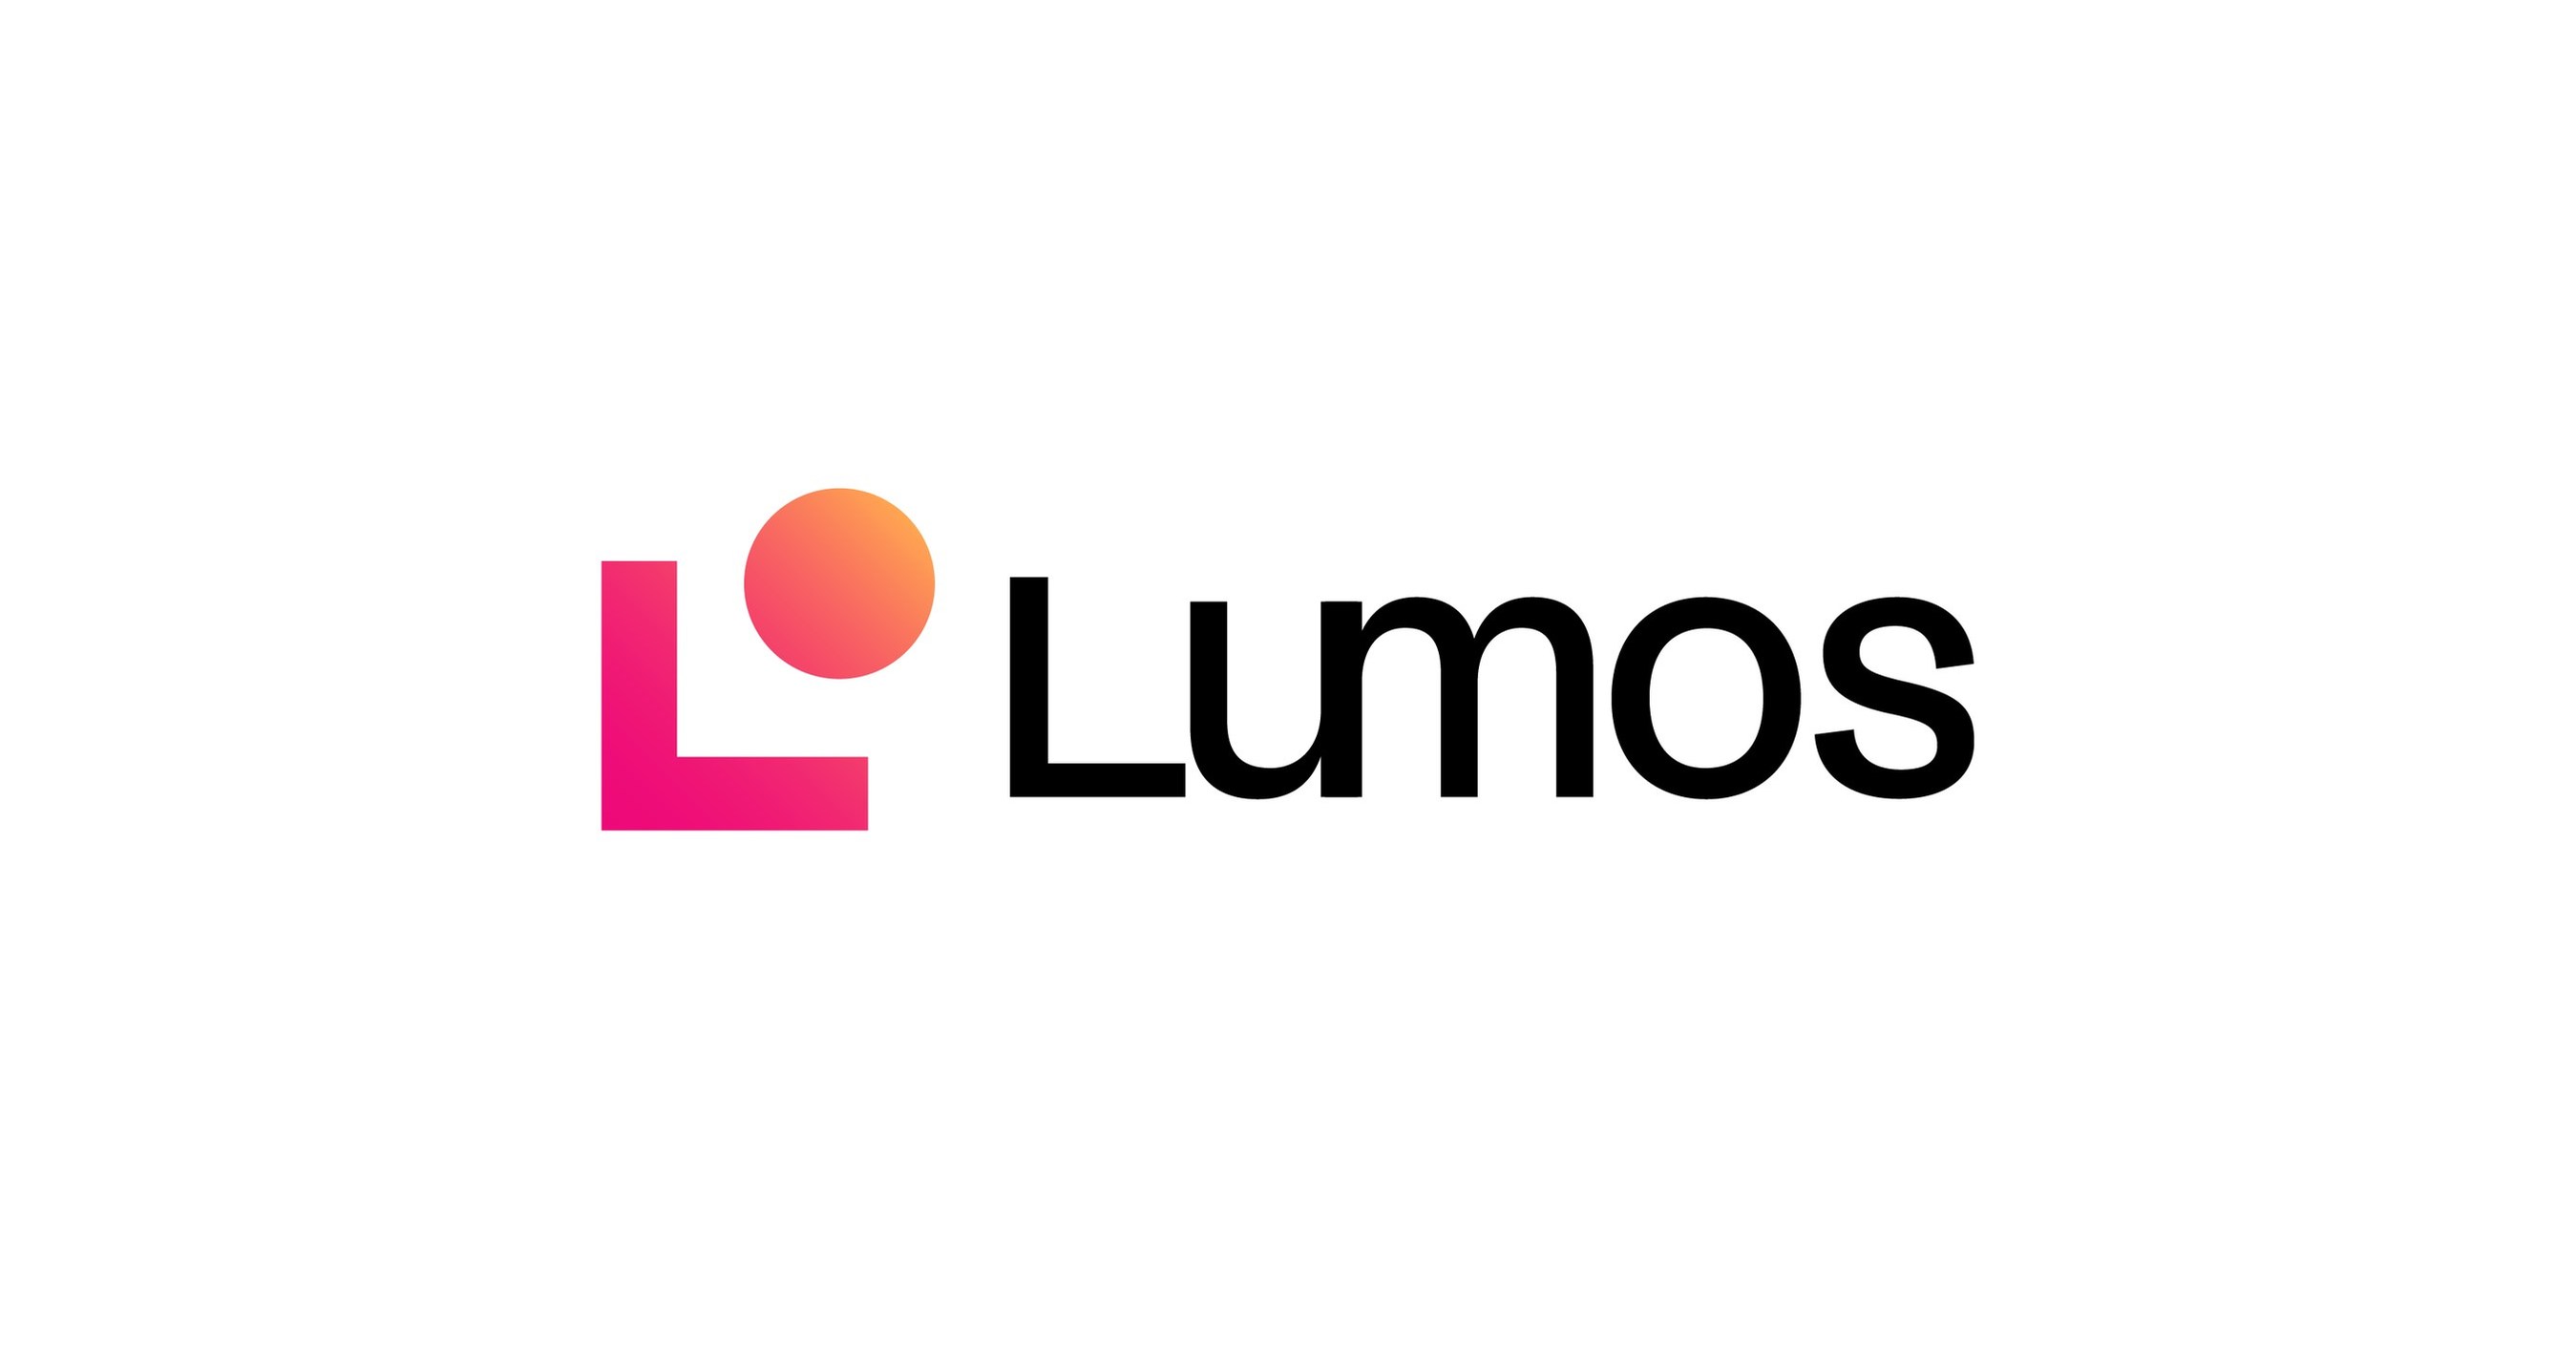 A Review: More Things You Need To Know About The LumosLumos